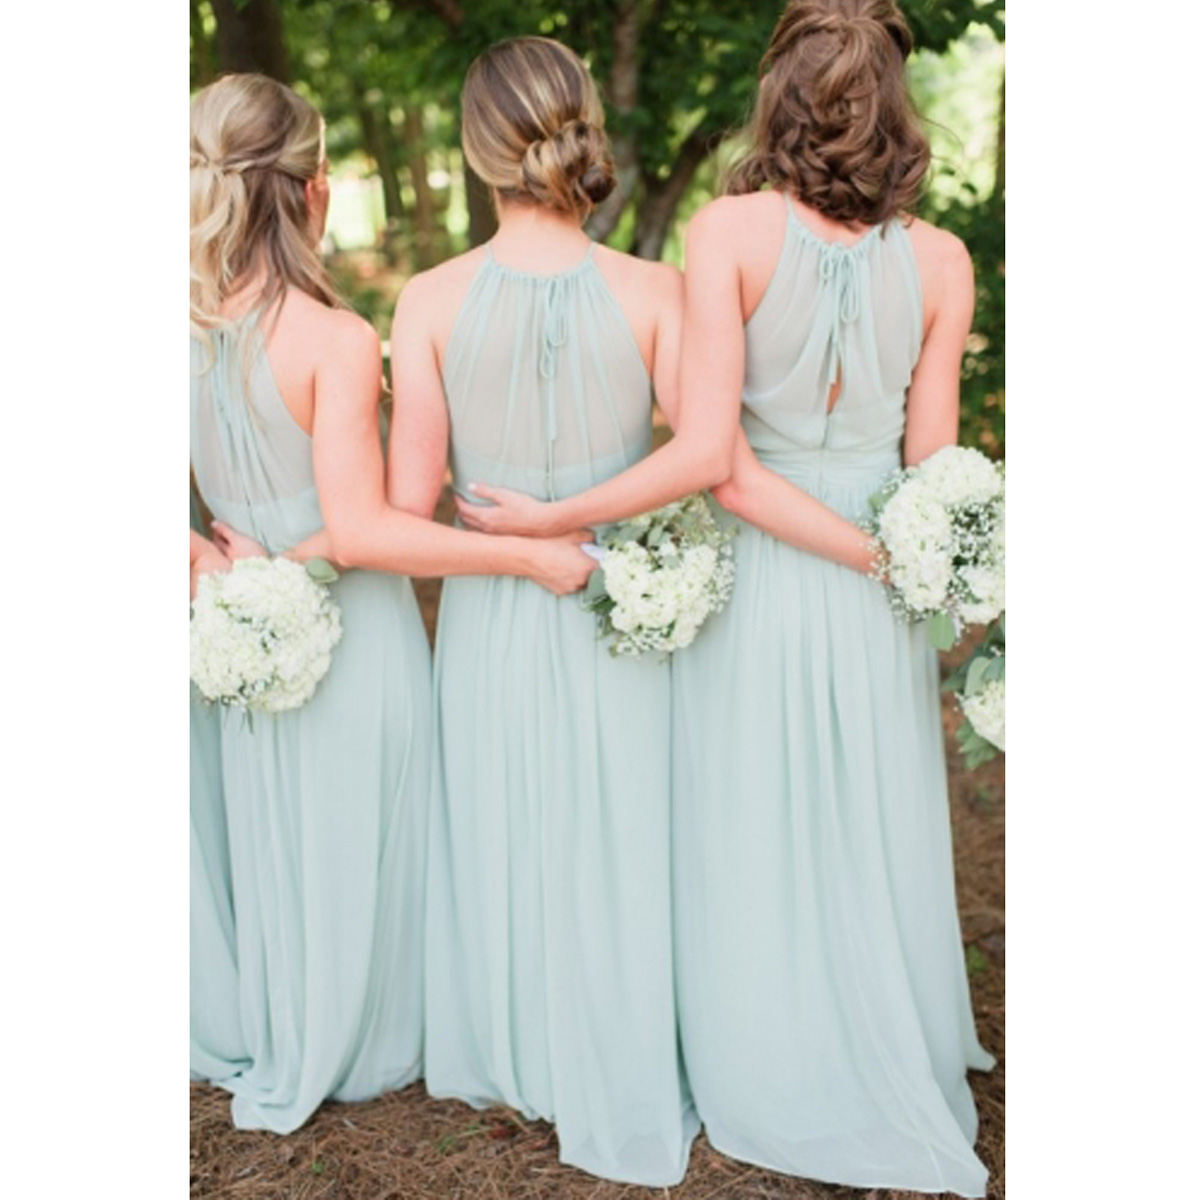 Sage Green Bridesmaid Dresses Long 2017 Style Halter Pleat Prom Evening Dresses Bridesmaid Gown For Wedding